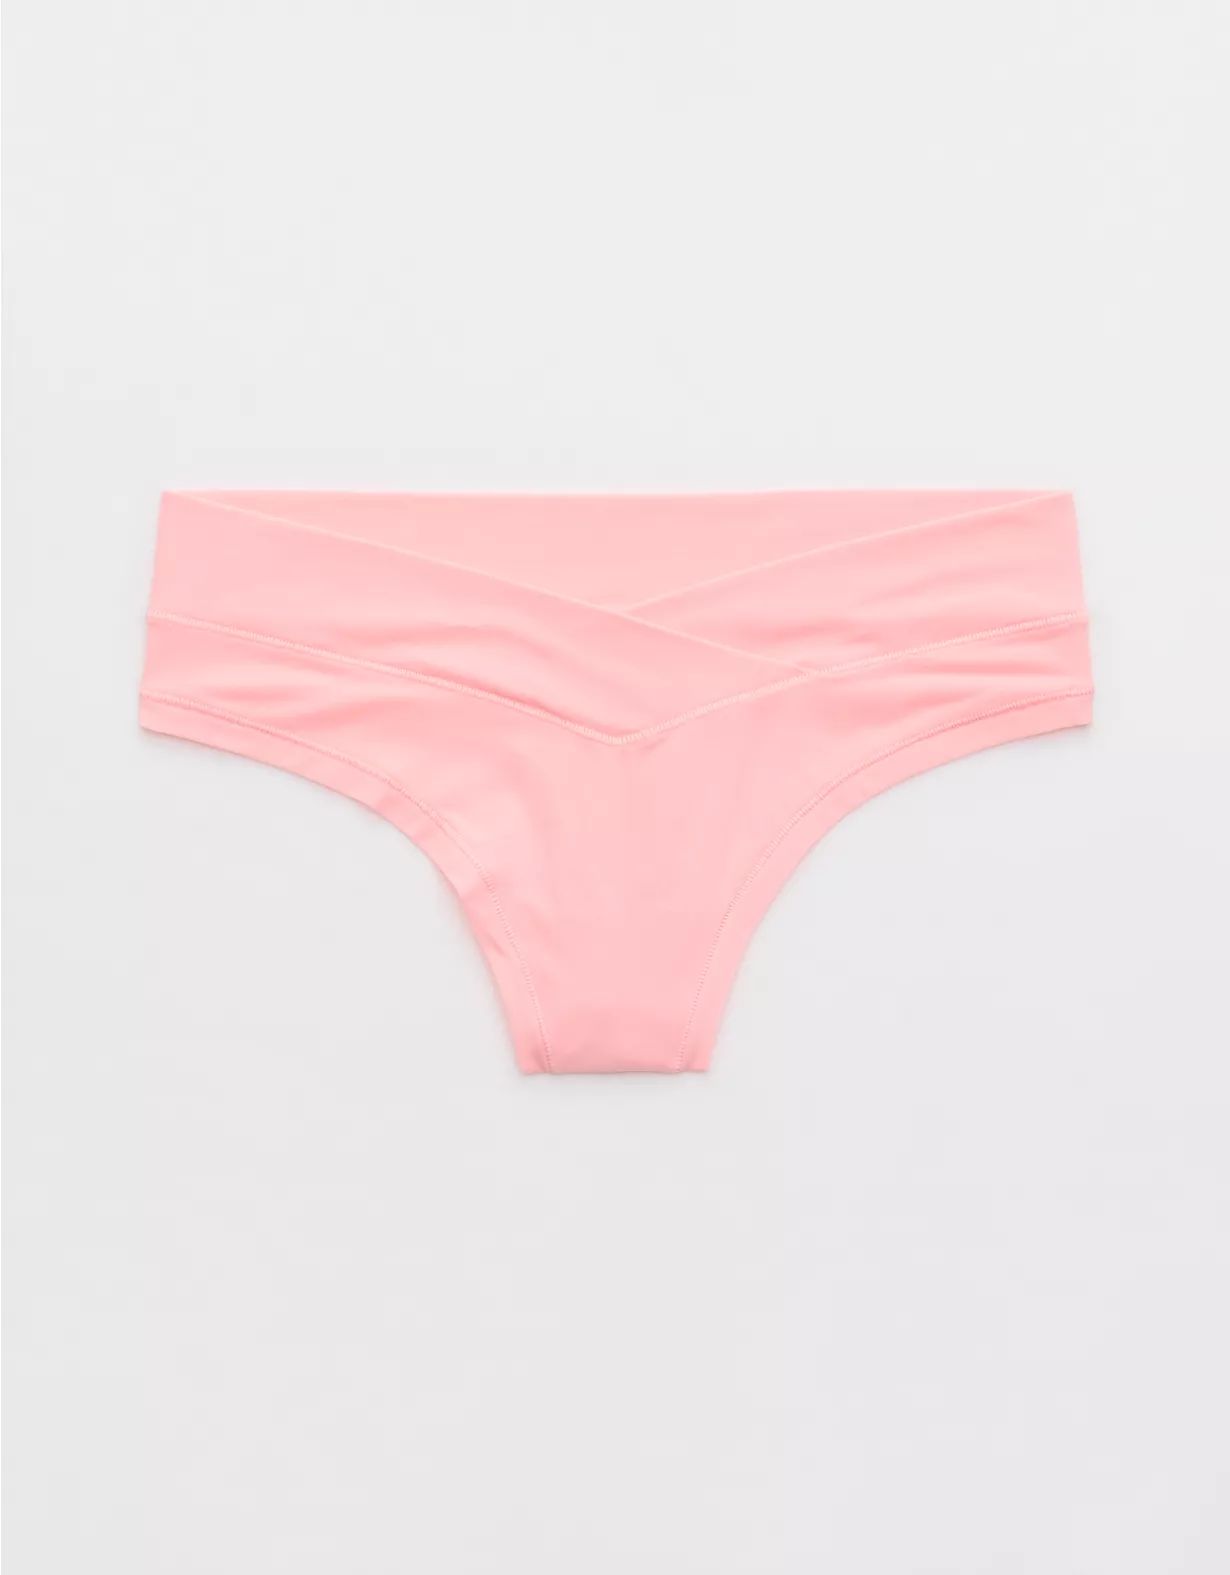 SMOOTHEZ Everyday Crossover Thong Underwear | Aerie